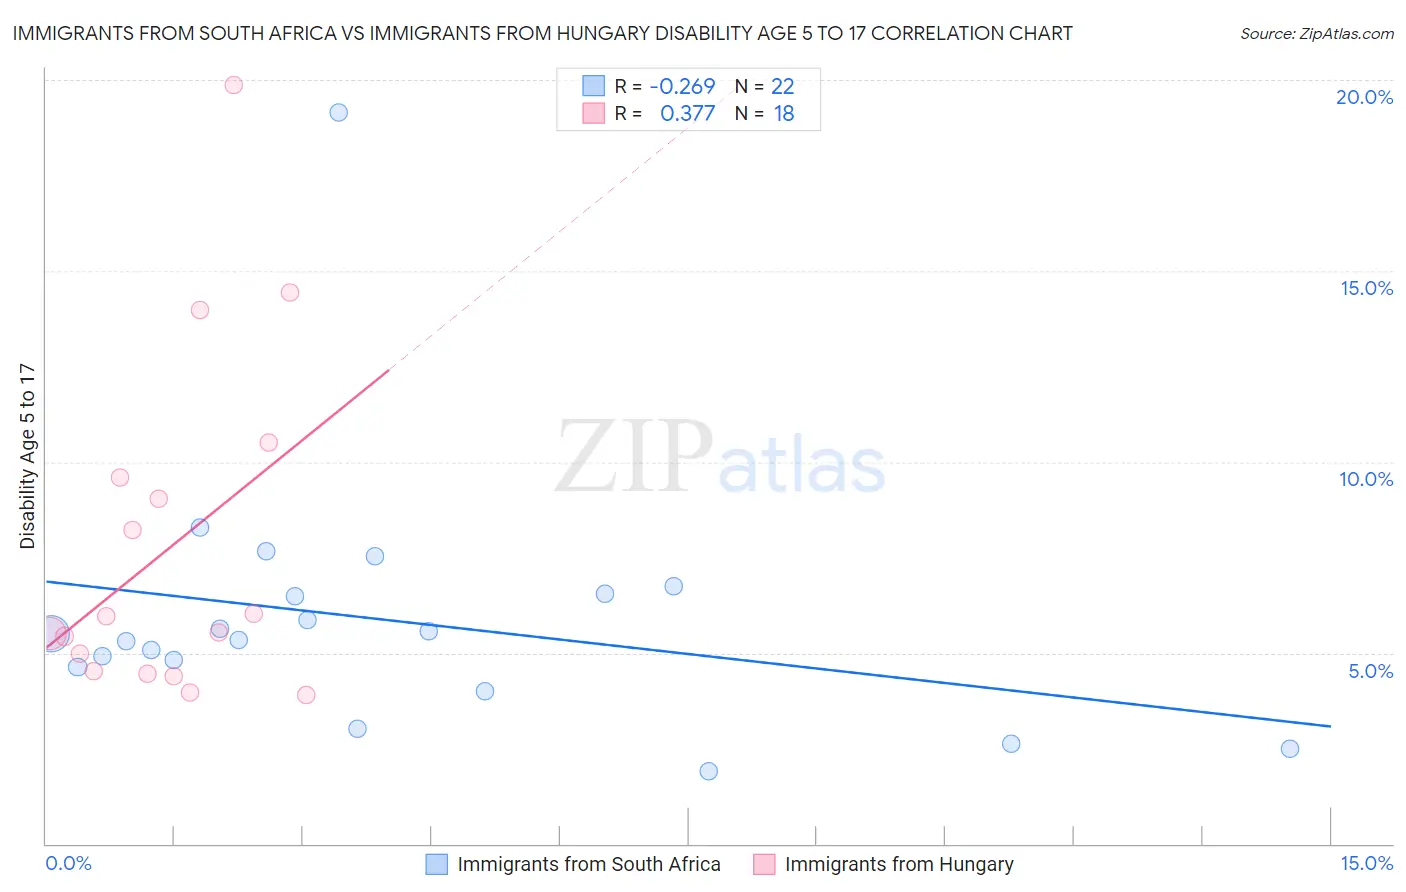 Immigrants from South Africa vs Immigrants from Hungary Disability Age 5 to 17